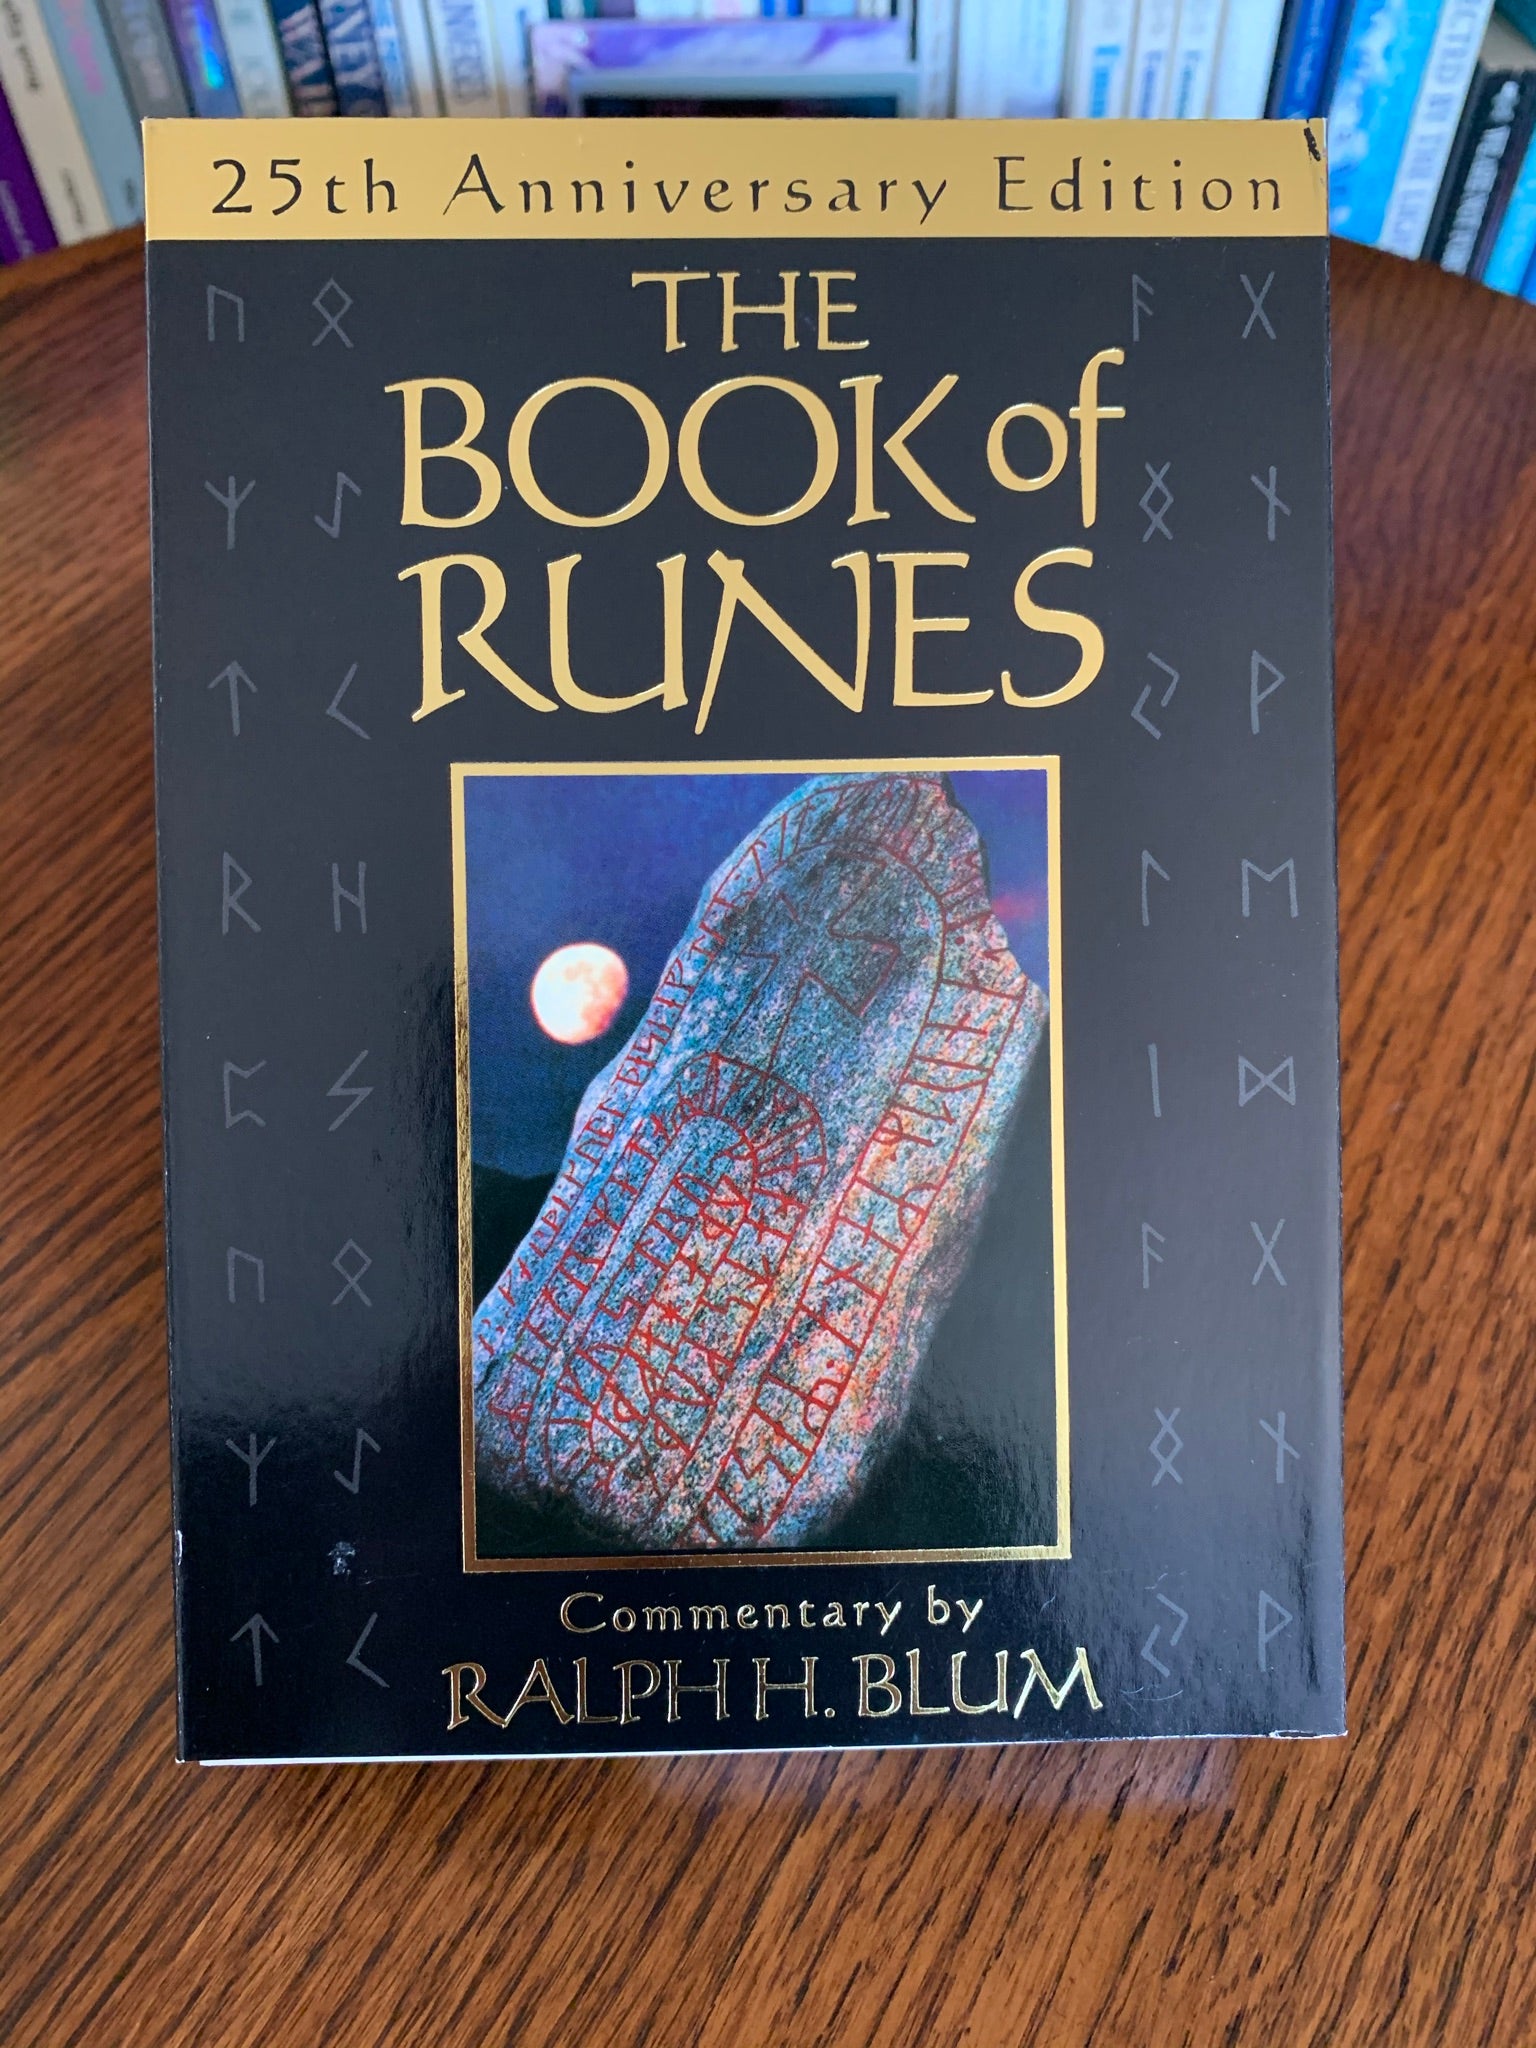 The Book of Runes by Ralph Blum has been around for many years. I have used this set for a very long time. He is the person who is credited (or criticized) for adding the blank rune to the original set of 24, making it 25. The set comes with a set of 25 large rune stones, a bag to store them in and a hardback guidebook. The photo shows the front of the box. Price is $37.50.